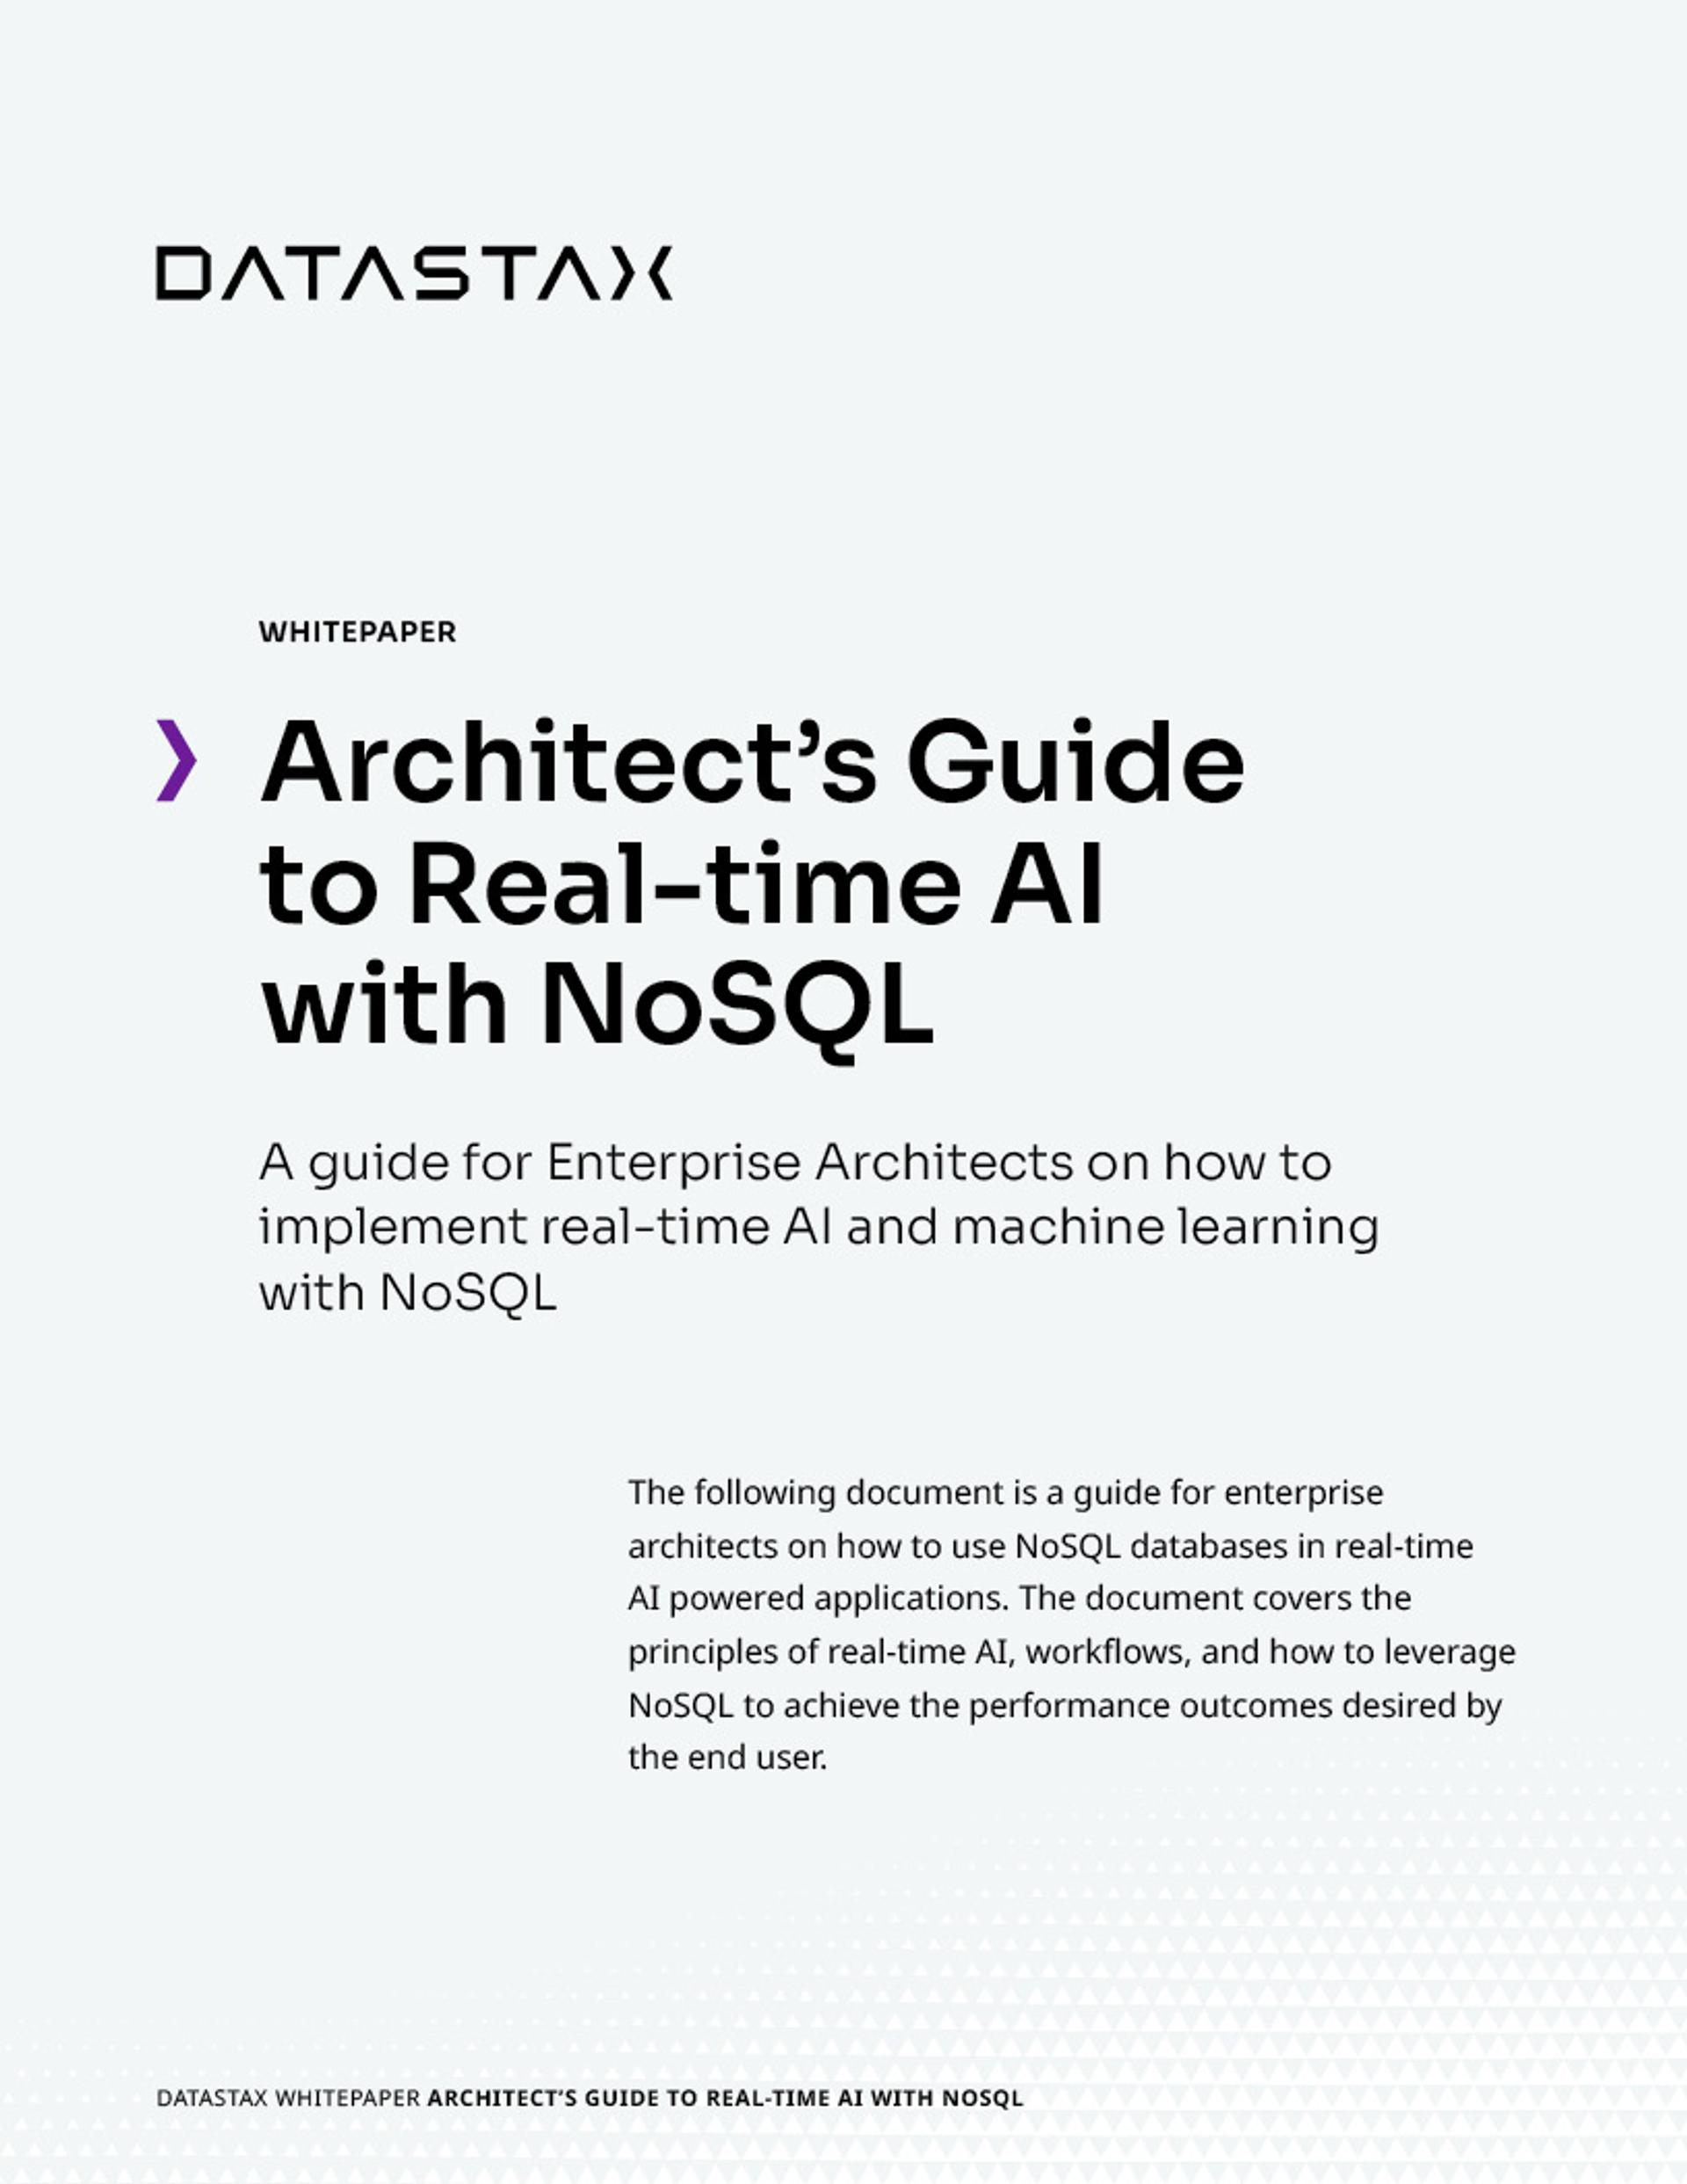 Architect’s Guide to Real-time AI with NoSQL